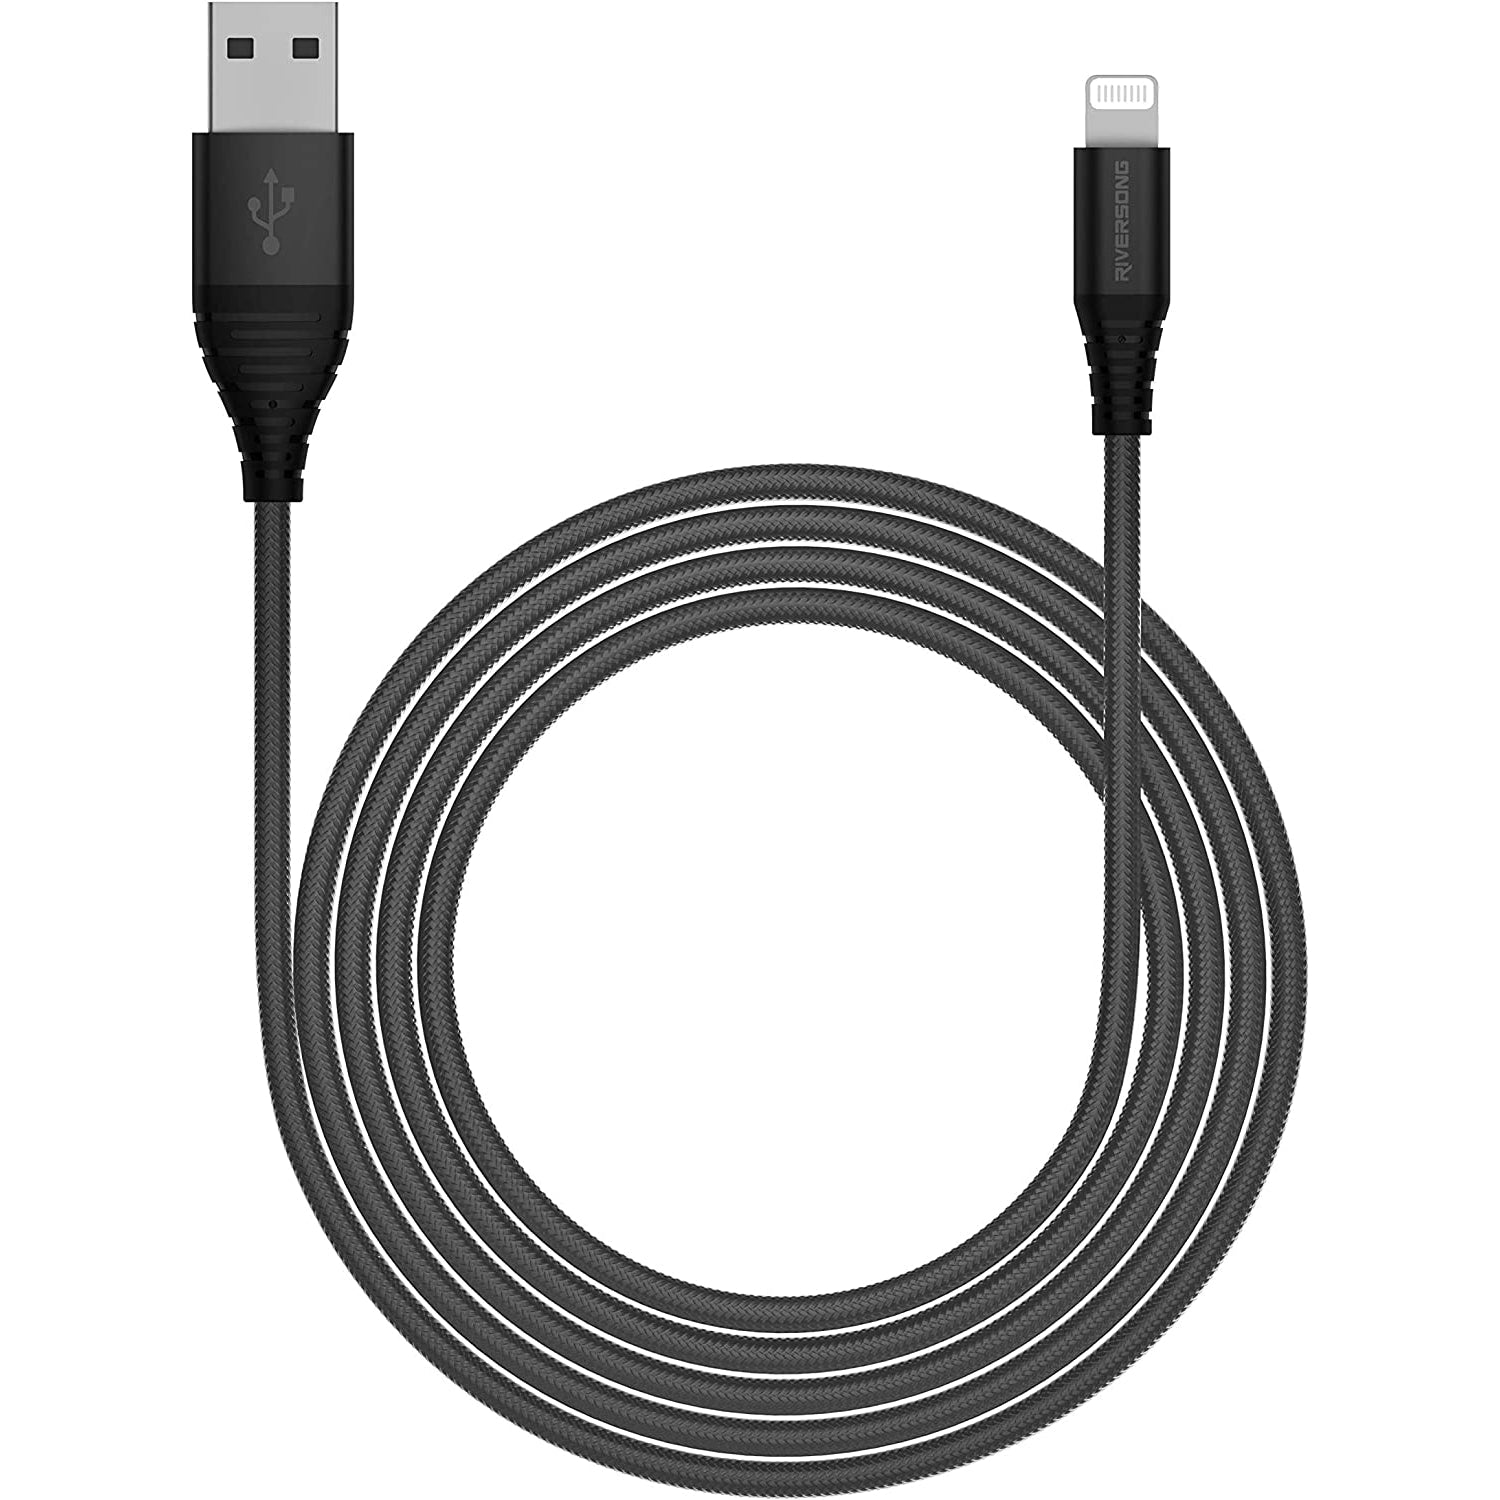 Riversong Alpha S 2.4A Nylon Braided Lightning Cable 1M CL32 - Black